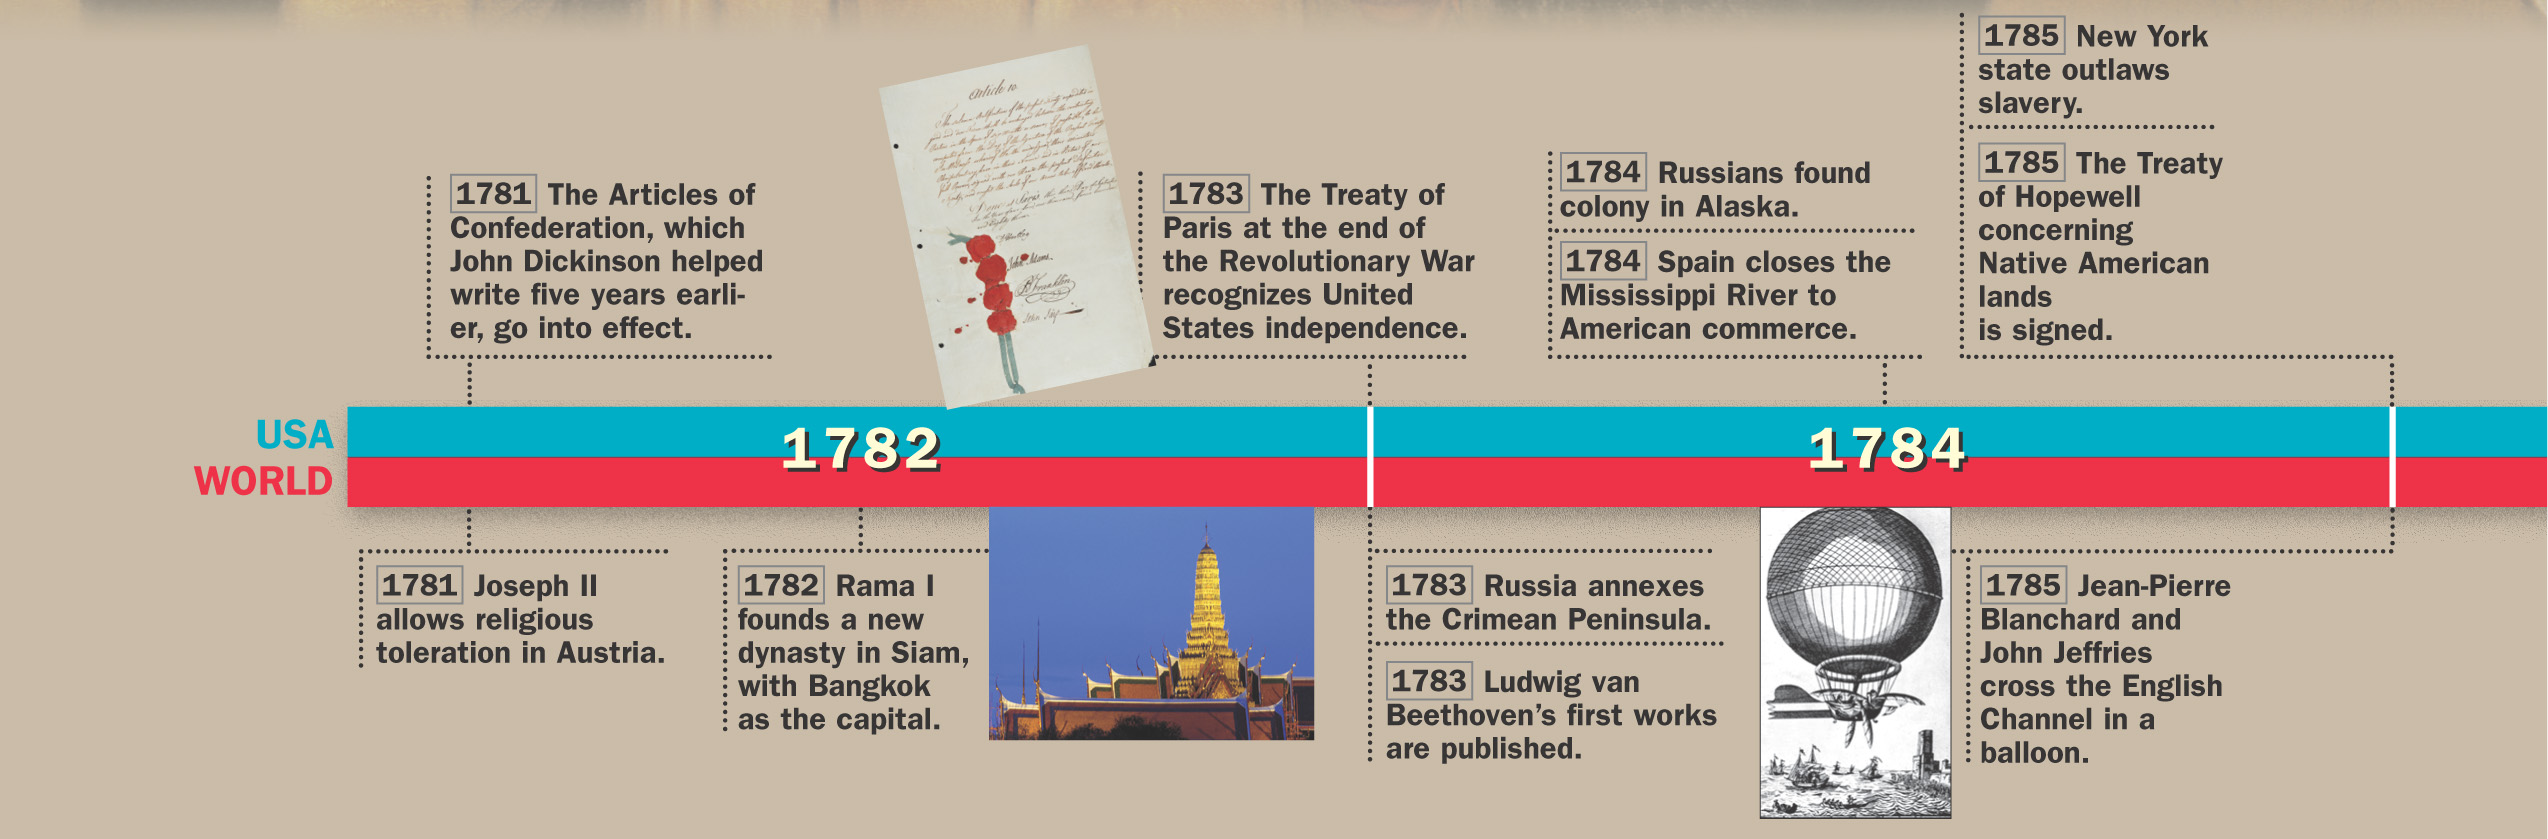 A timeline of historical events from 1782 to 1788 in both the U.S. and the world